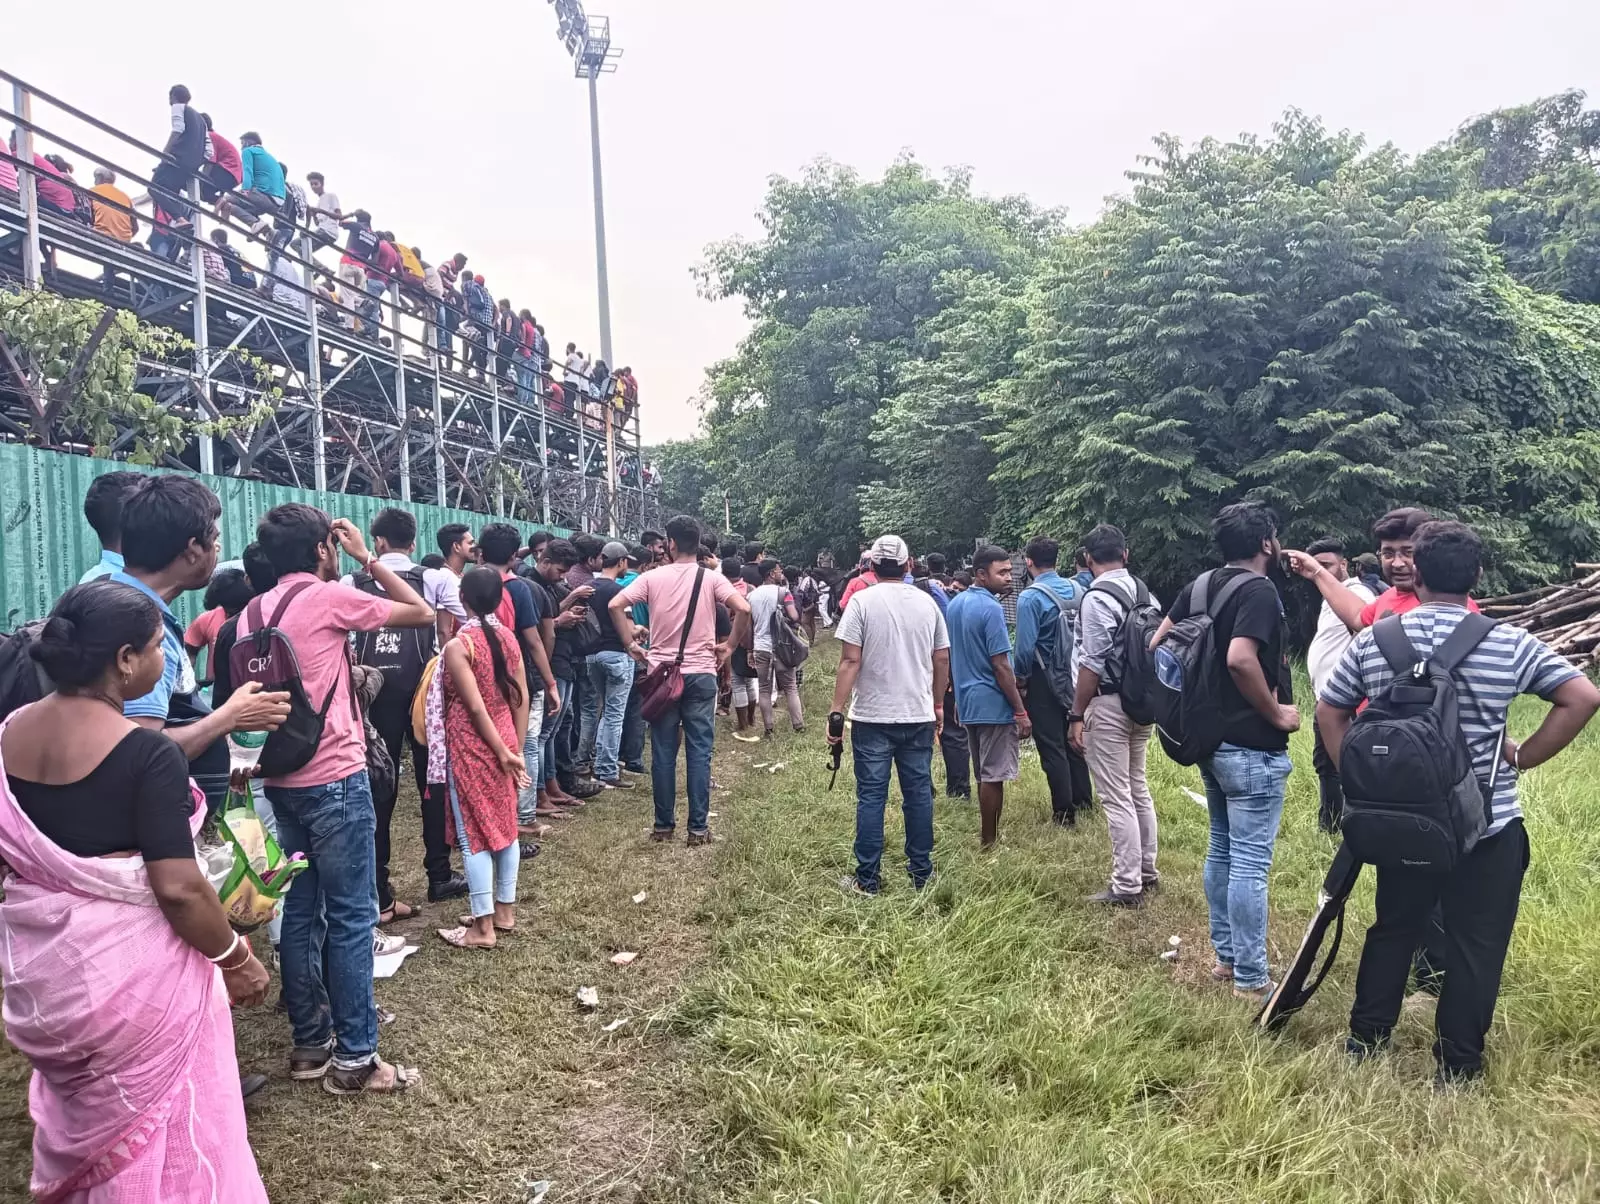 Mohun Bagan fans outside the club ground waiting for tickets.